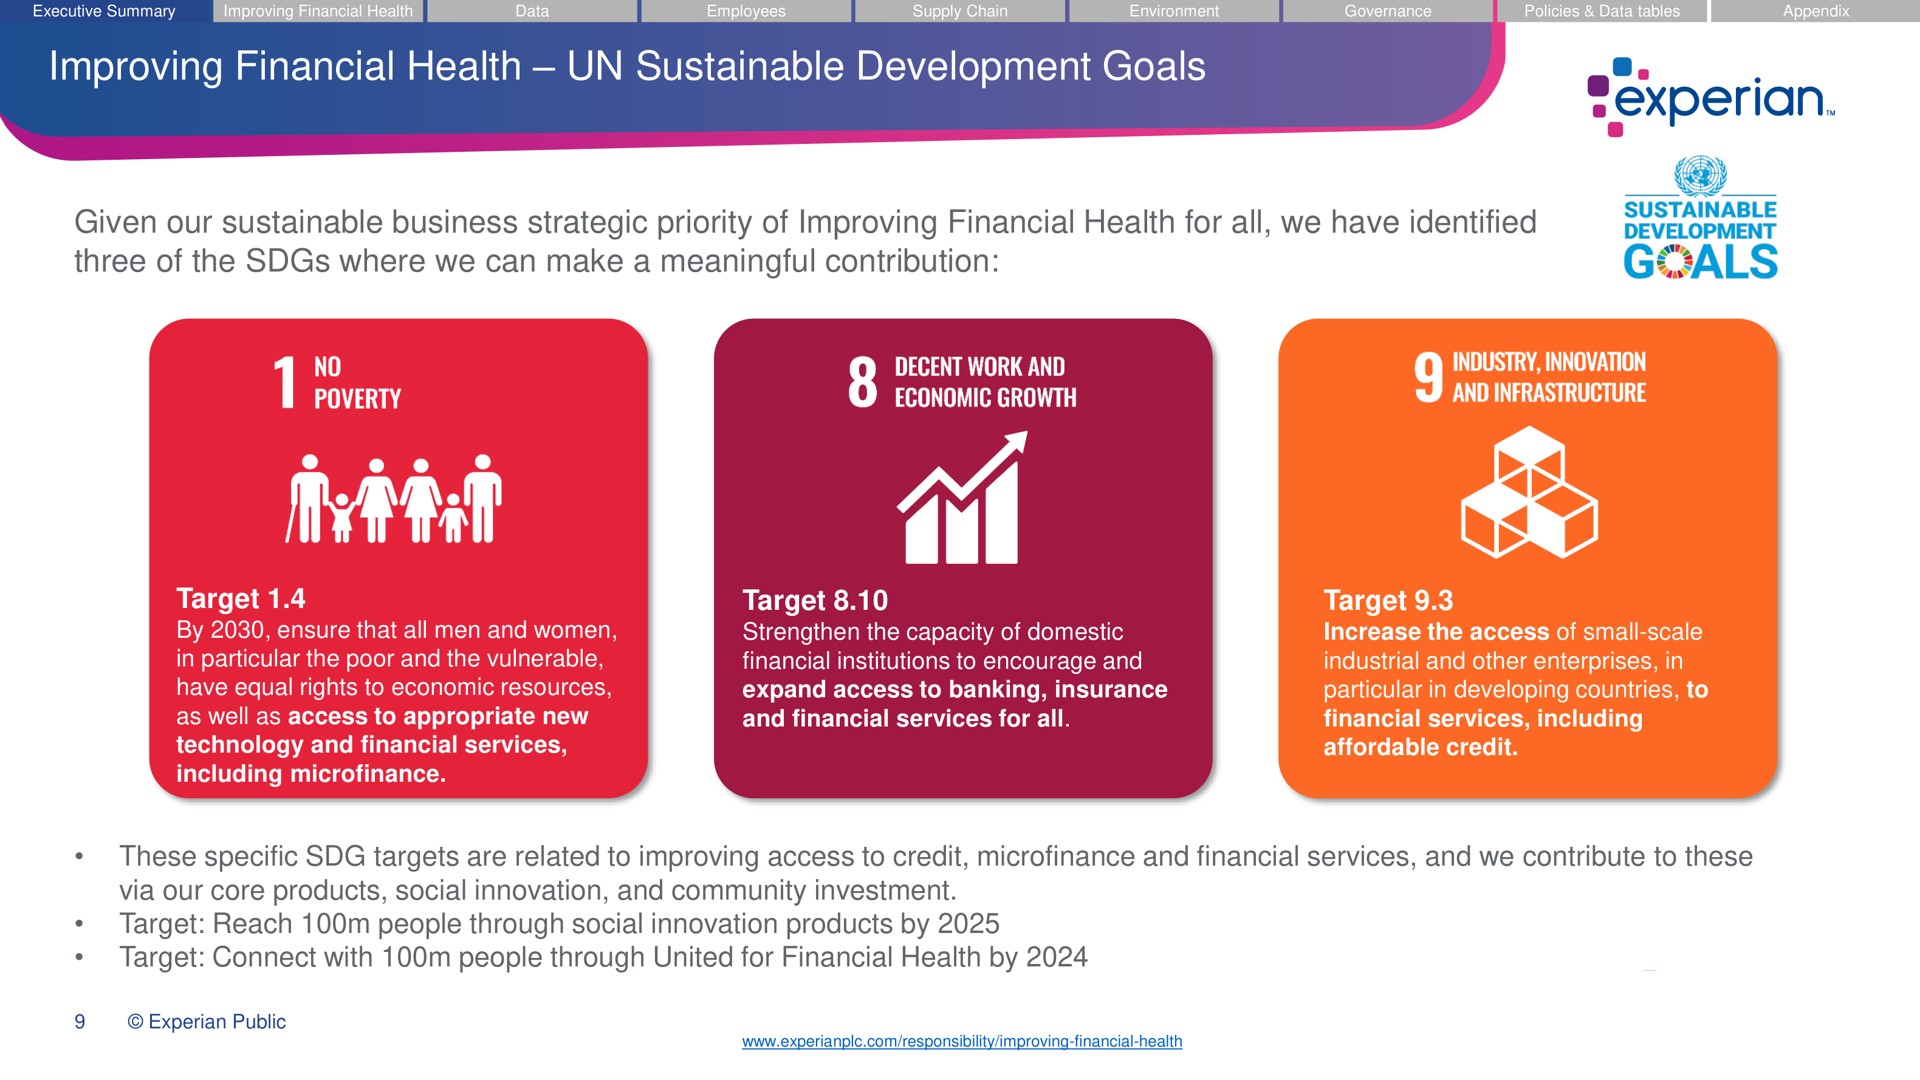 improving financial health sustainable development goals given our sustainable business strategic priority of improving financial health for all we have identified three of the where we can make a meaningful contribution target by ensure that all men and women in particular the poor and the vulnerable have equal rights to economic resources as well as access to appropriate new technology and financial services including target strengthen the capacity of domestic financial institutions to encourage and expand access to banking insurance and financial services for all target increase the access of small scale industrial and other enterprises in particular in developing countries to financial services including affordable credit these specific targets are related to improving access to credit and financial services and we contribute to these via our core products social innovation and community investment target reach people through social innovation products by target connect with people through united for financial health by als | Experian